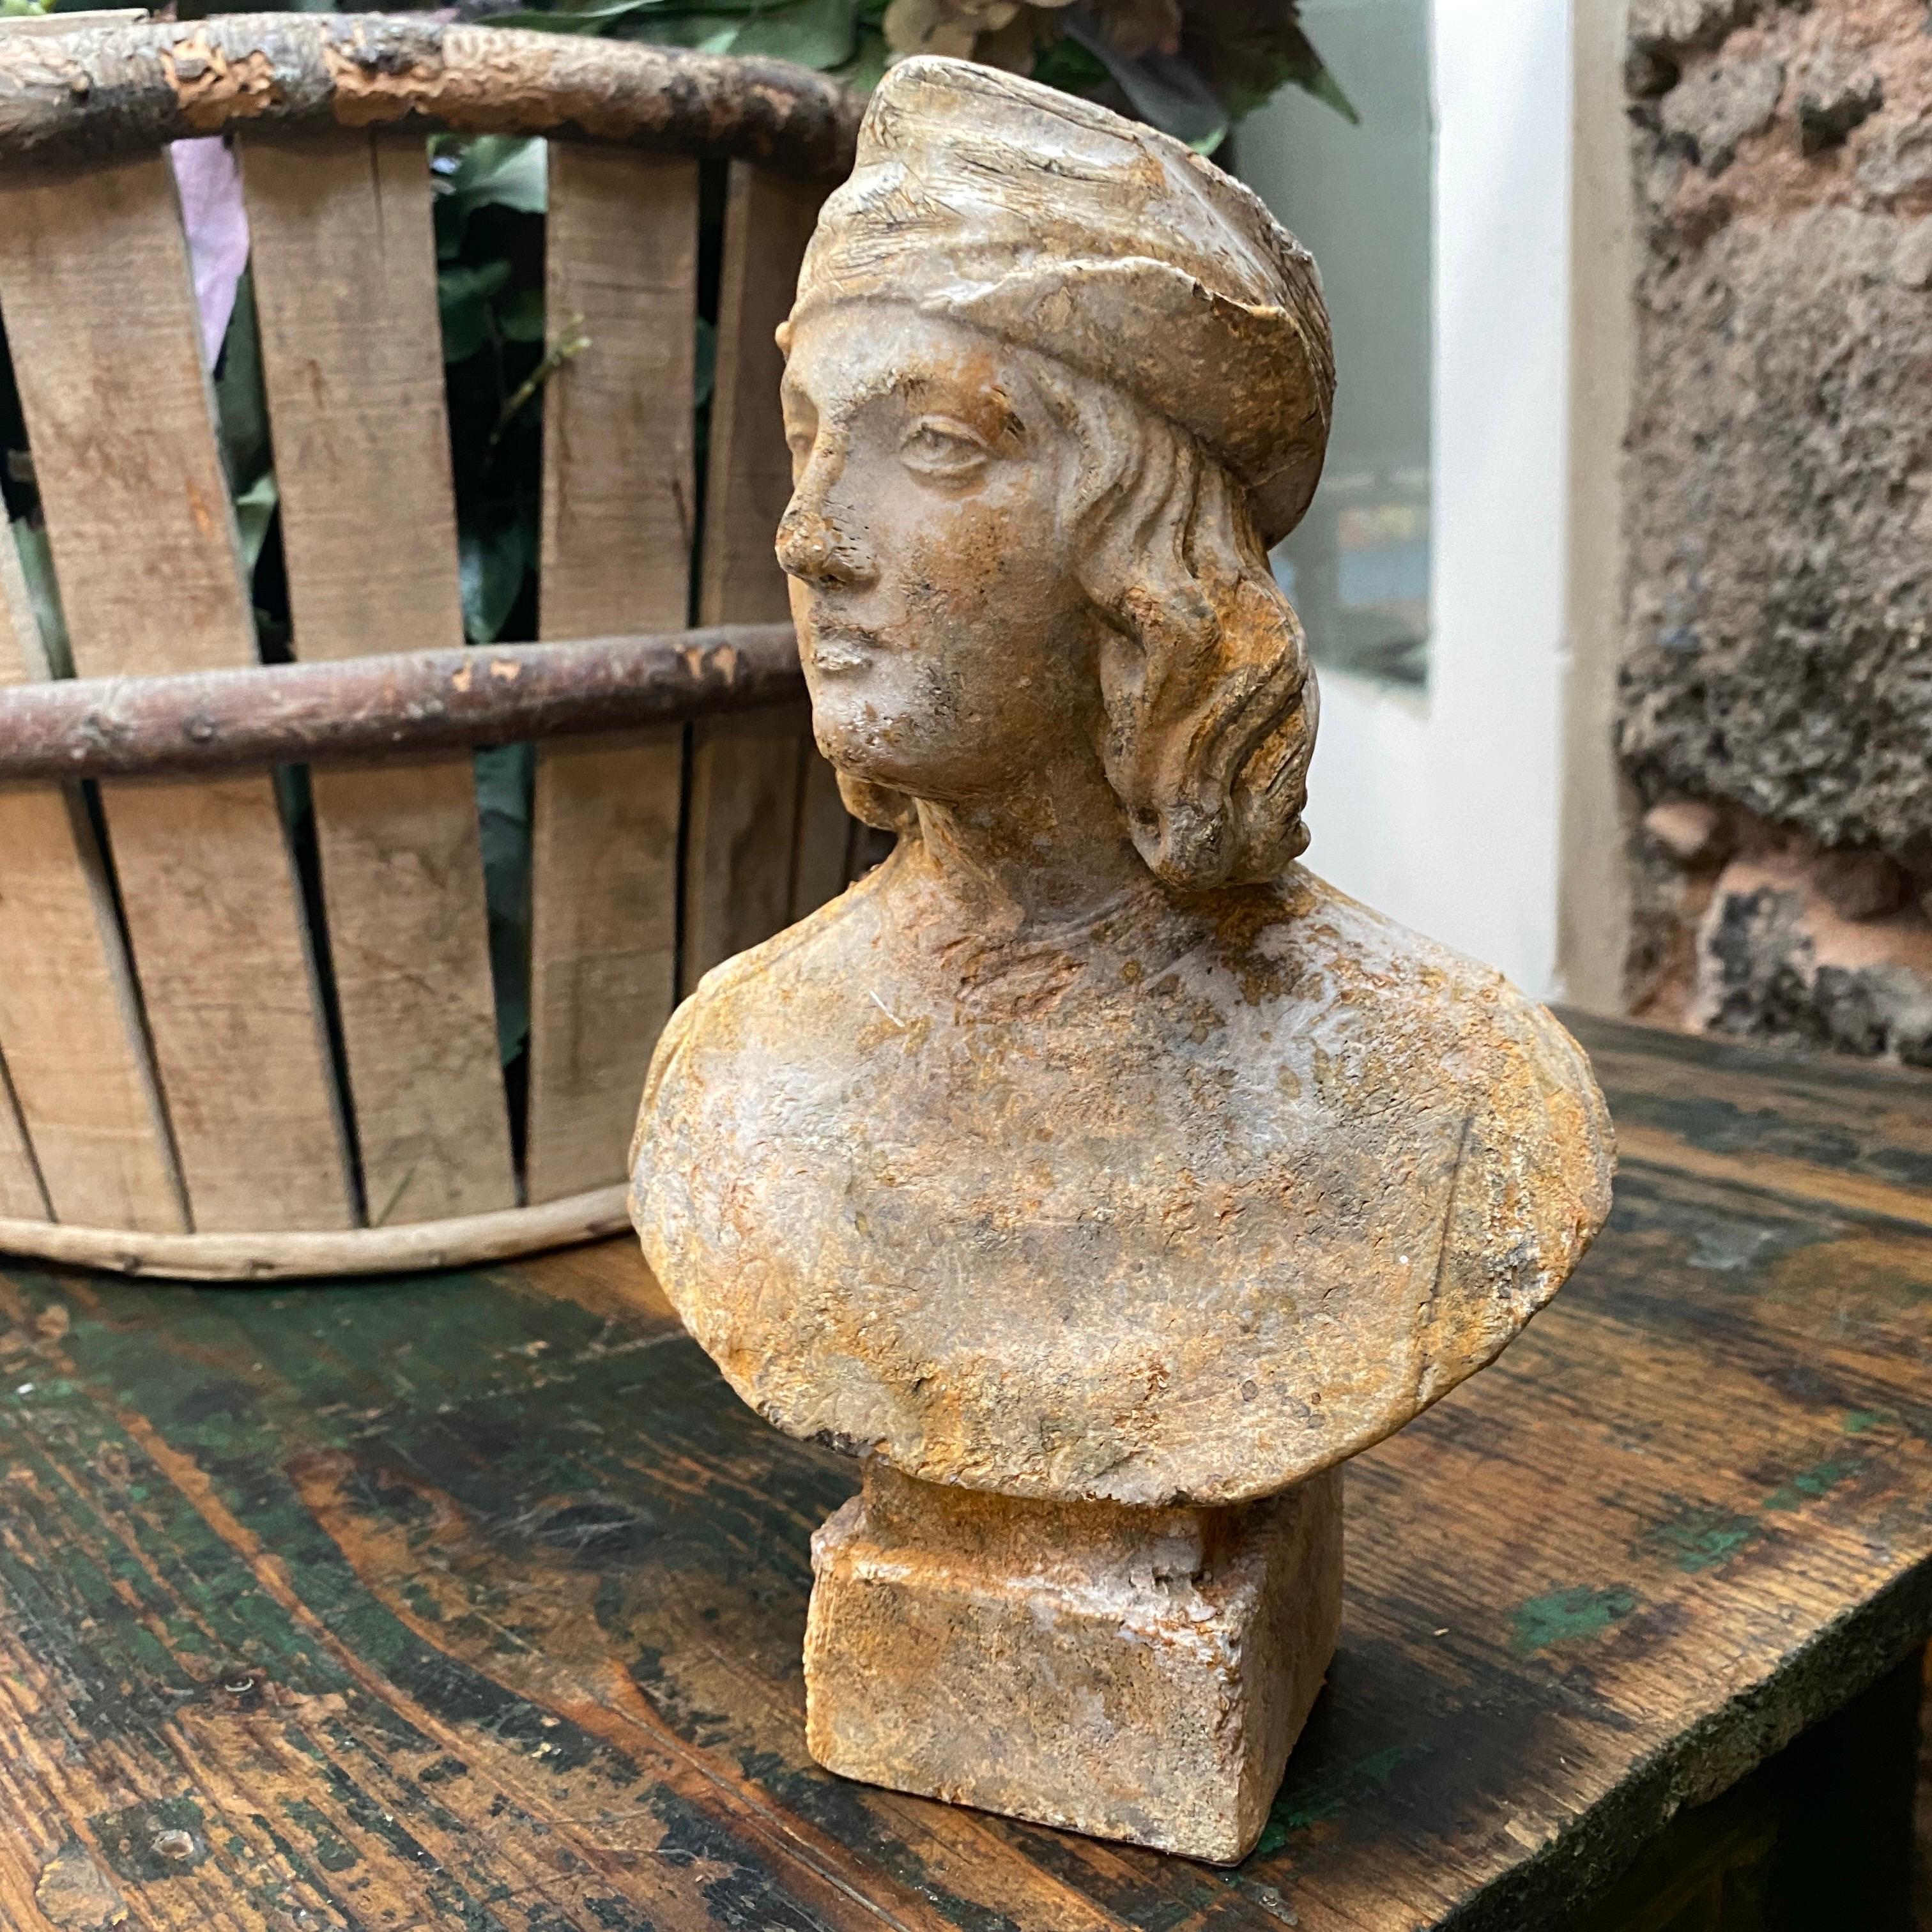 20th Century 1930s Original Patina Sicilian Plaster Sculpture depicting a Bust of Young Man